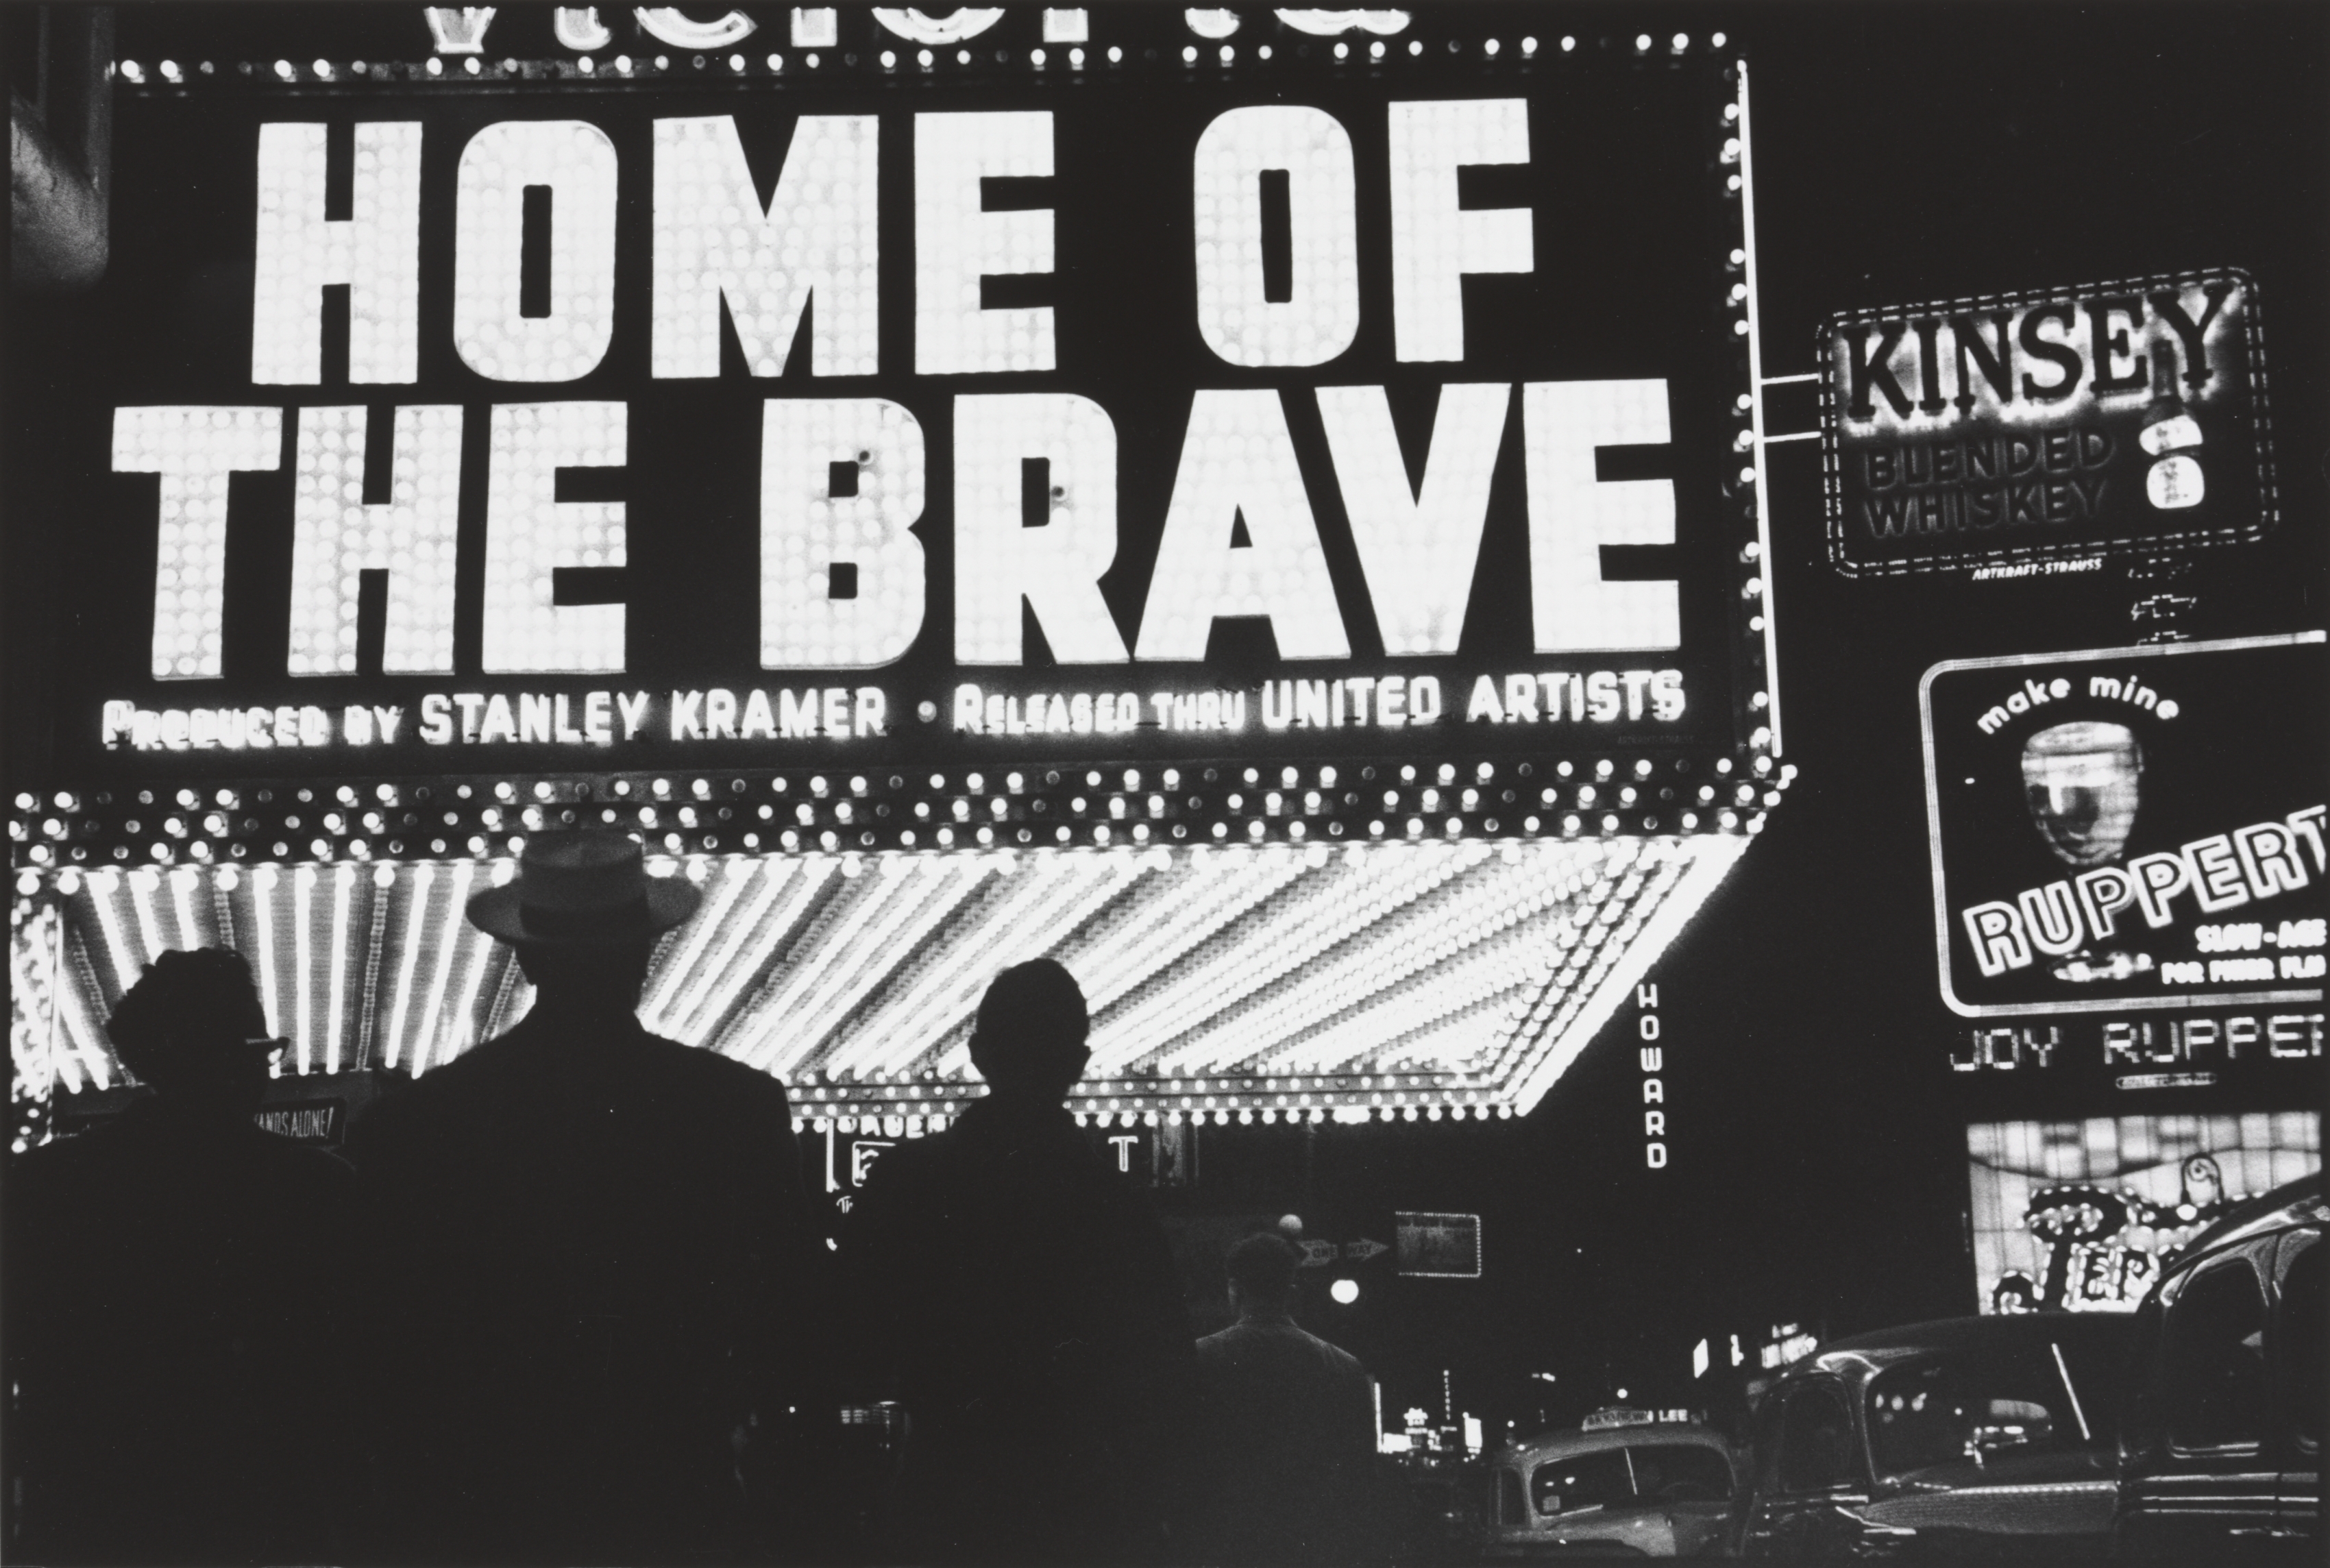 Times Square, NY (Home of the Brave)